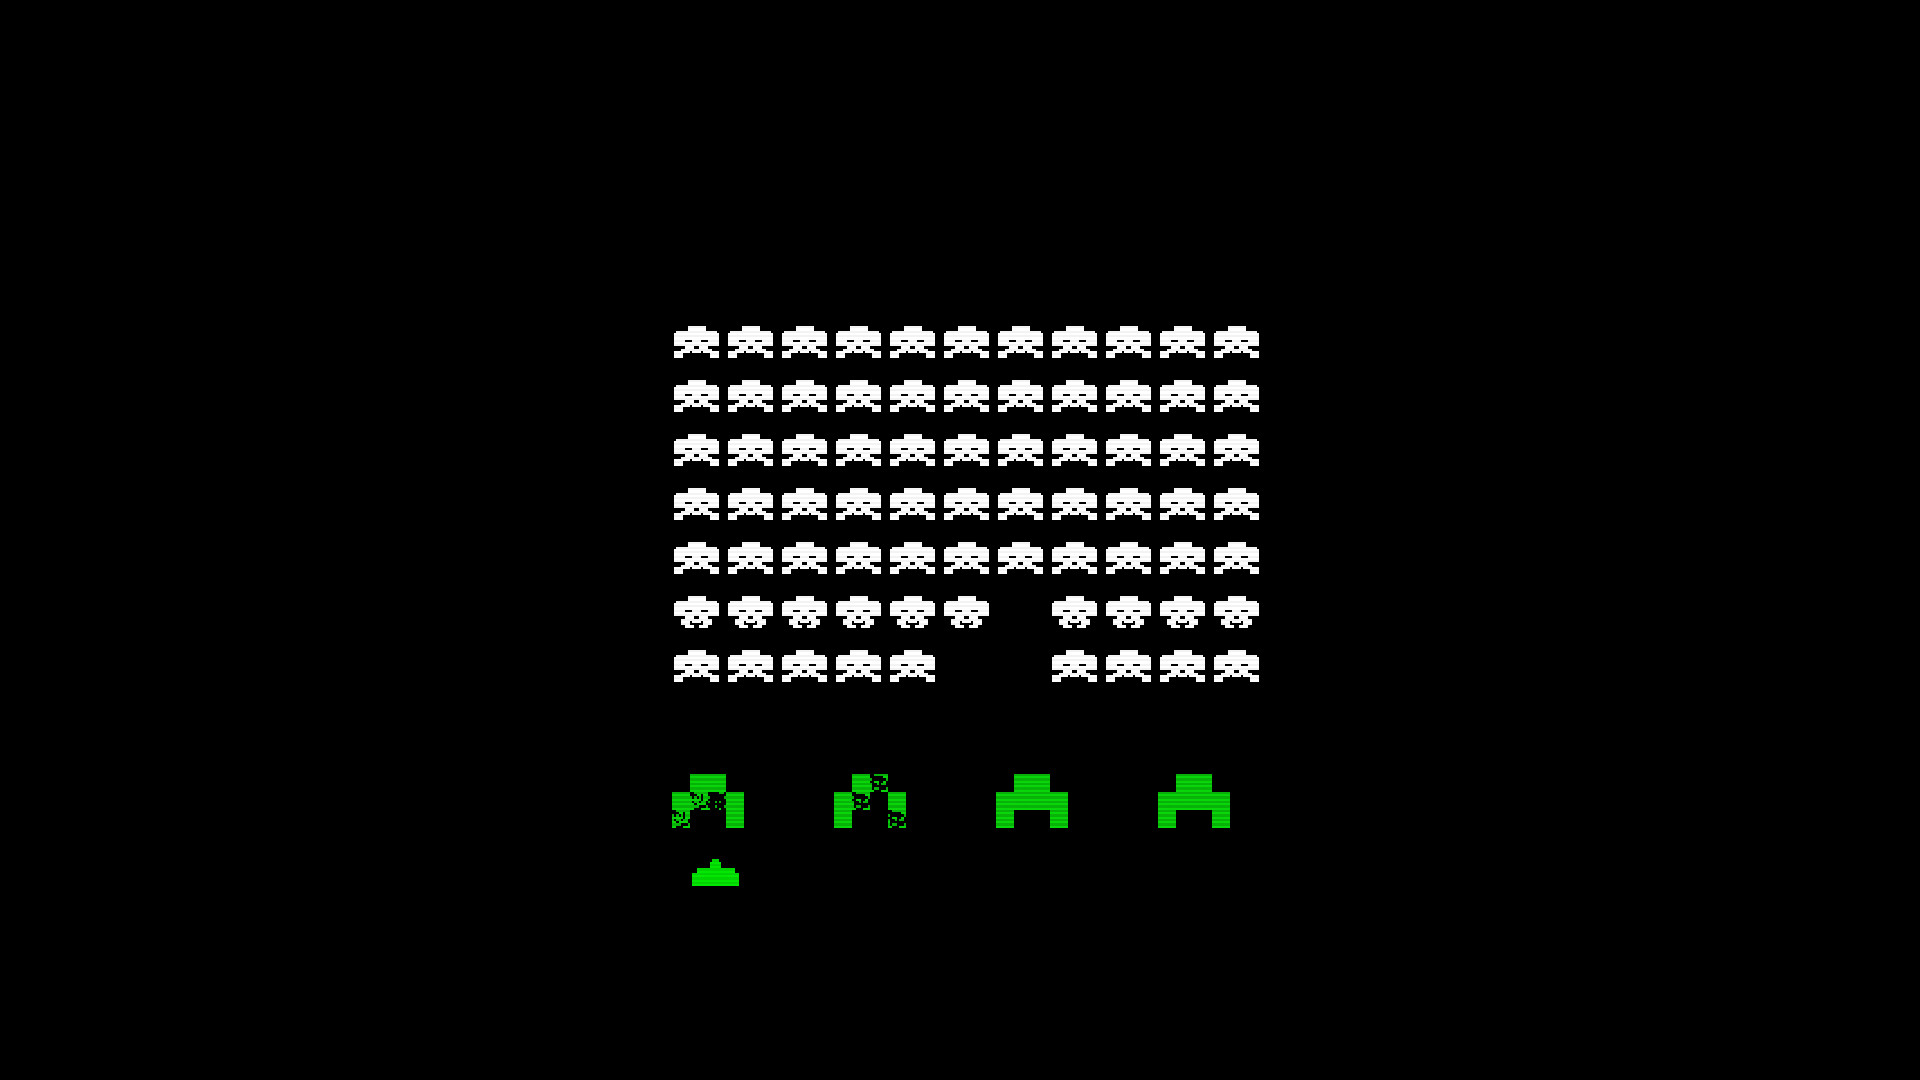 1920x1080 Space Invaders Arcade wallpaper